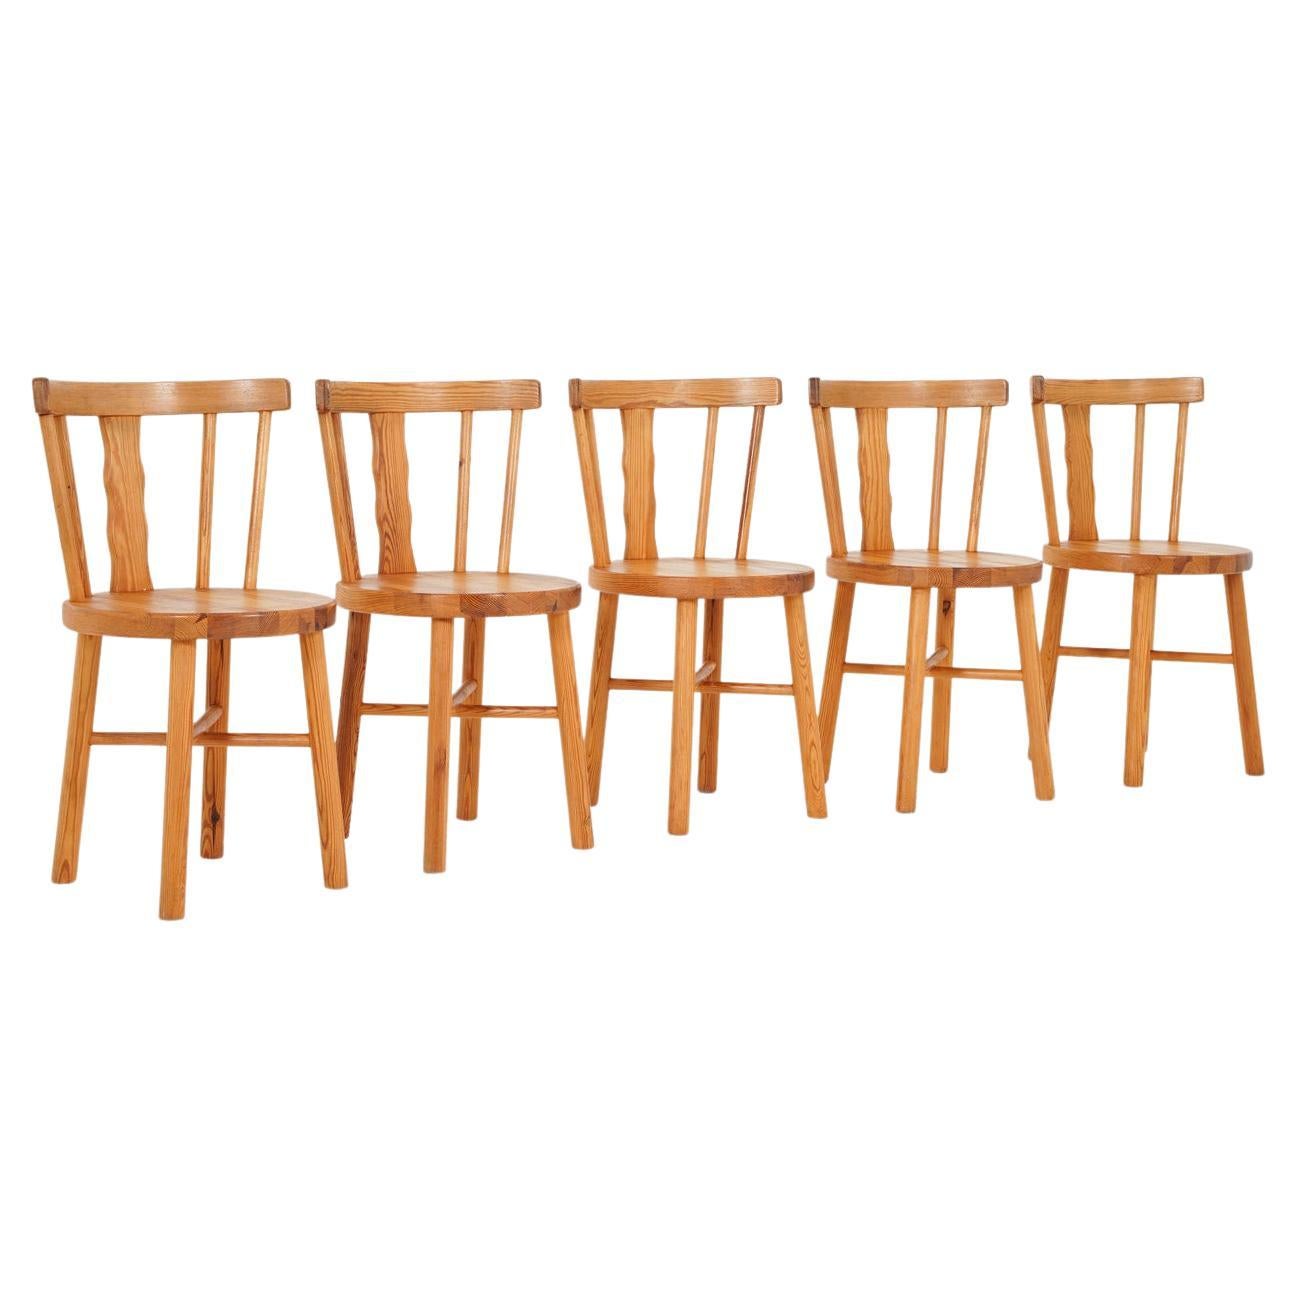 Set of Five Swedish Chairs in Pine by Steneby Hemslöjd For Sale